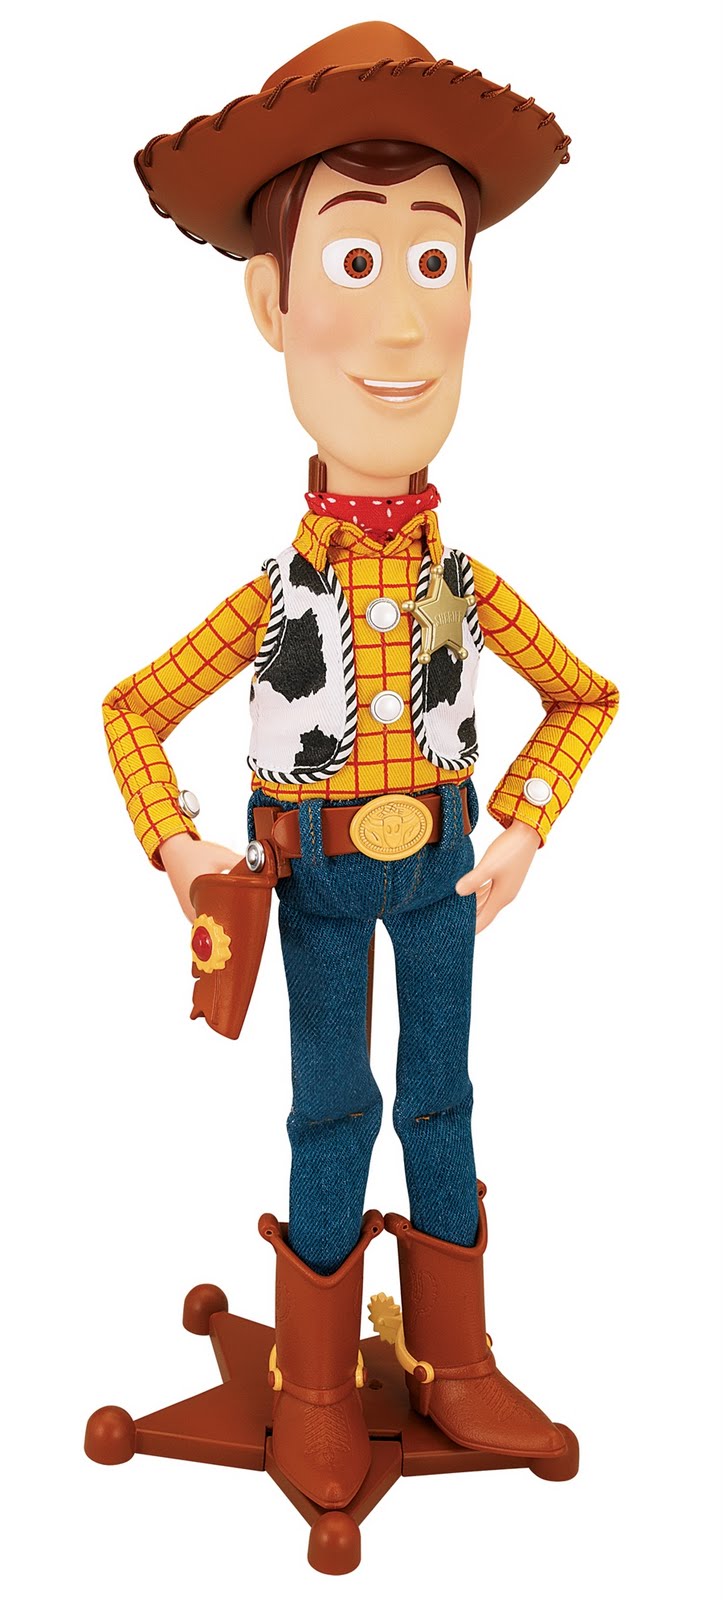 COOL IMAGES: Woody the Cowboy